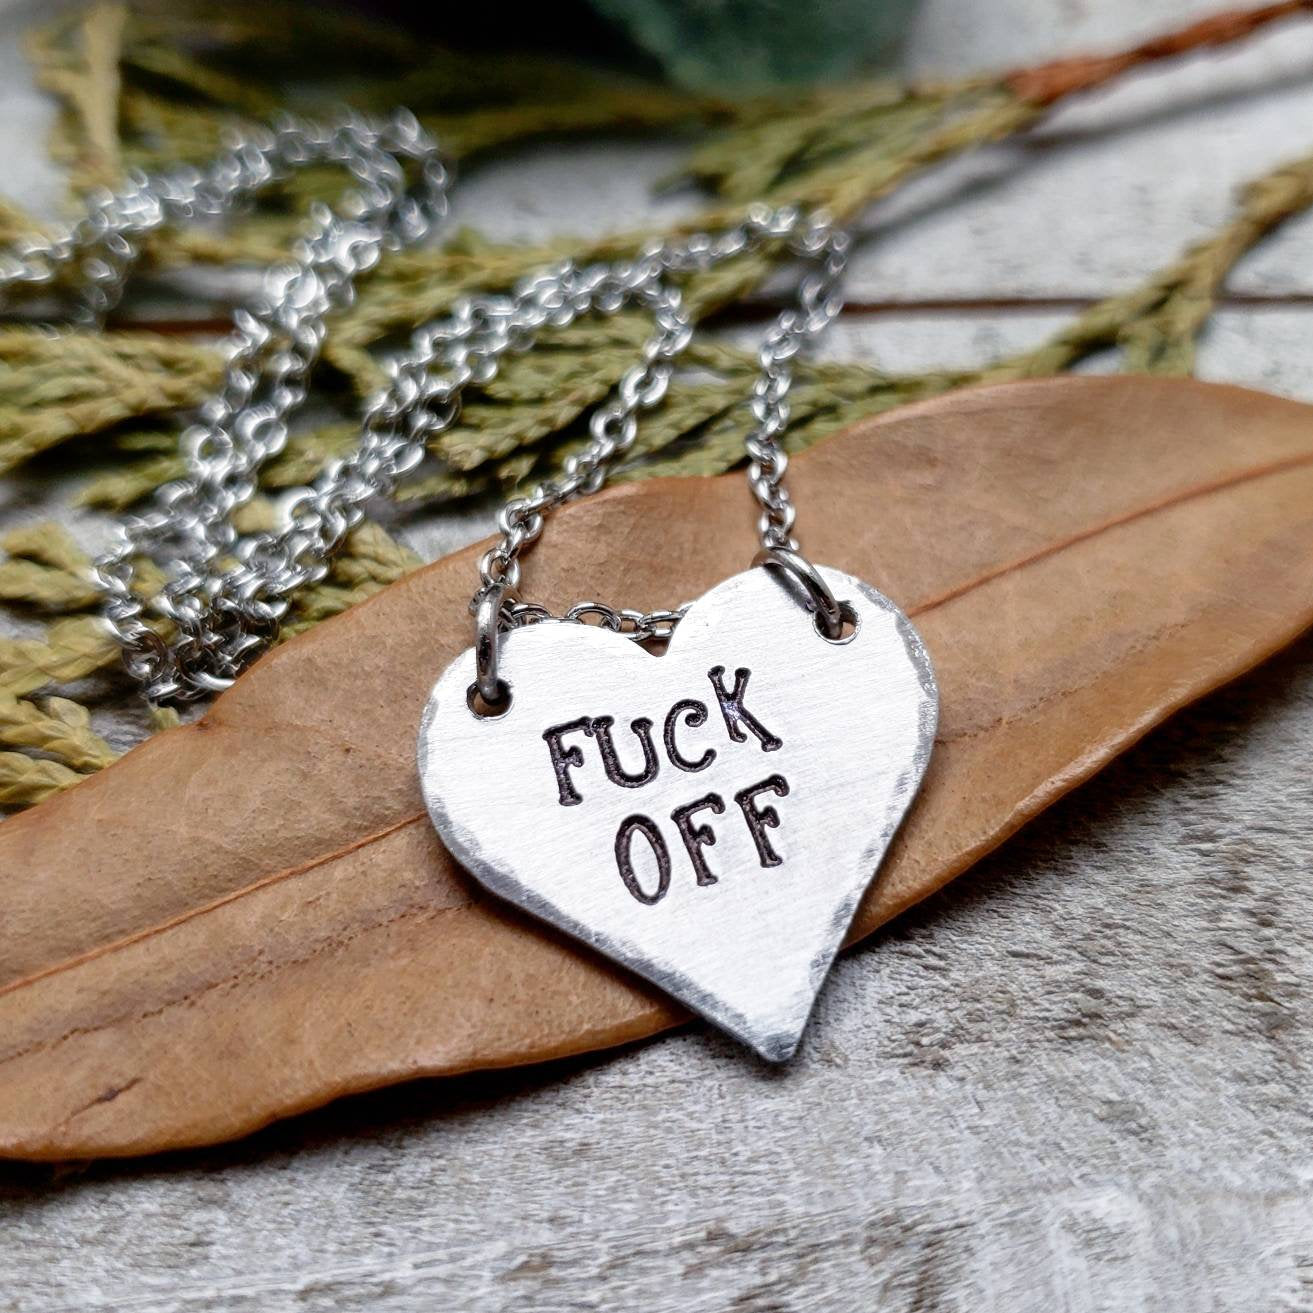 F*ck off necklace